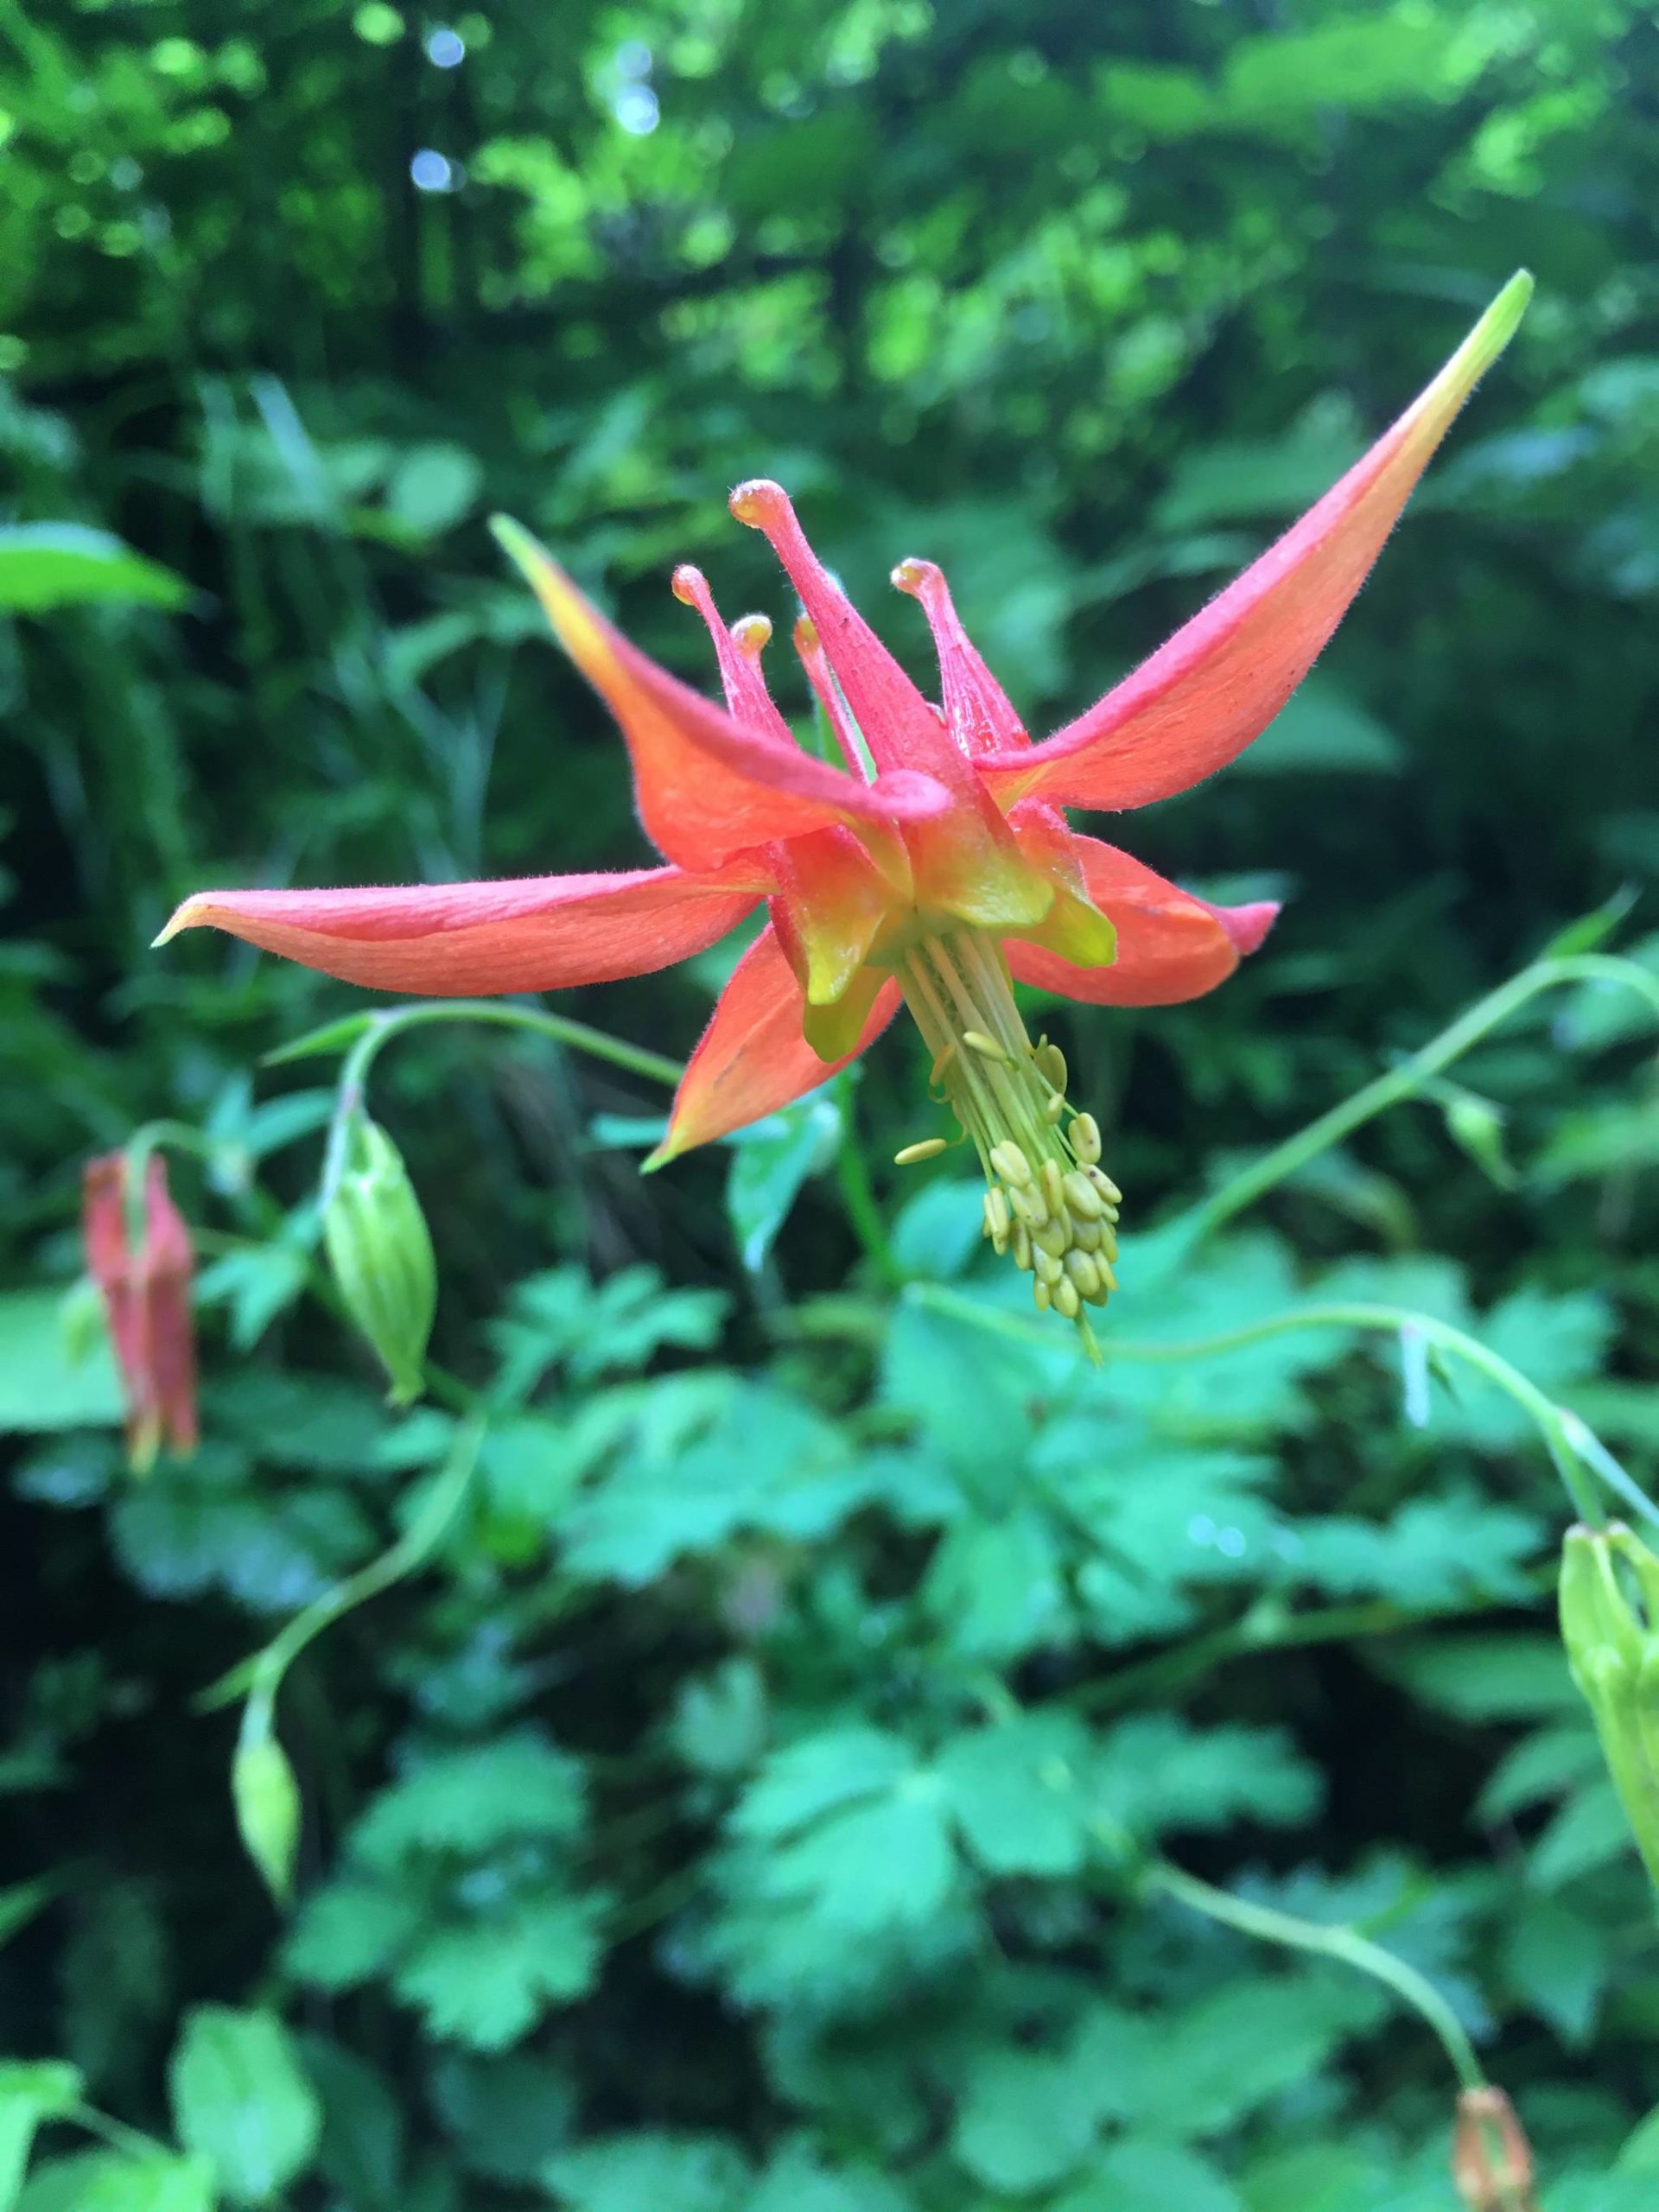 The bright colors of this western columbine contrast with the surrounding greenery in this photo shared Wednesday, June 17, 2020. (Courtesy Photo | Deborah Rudis)